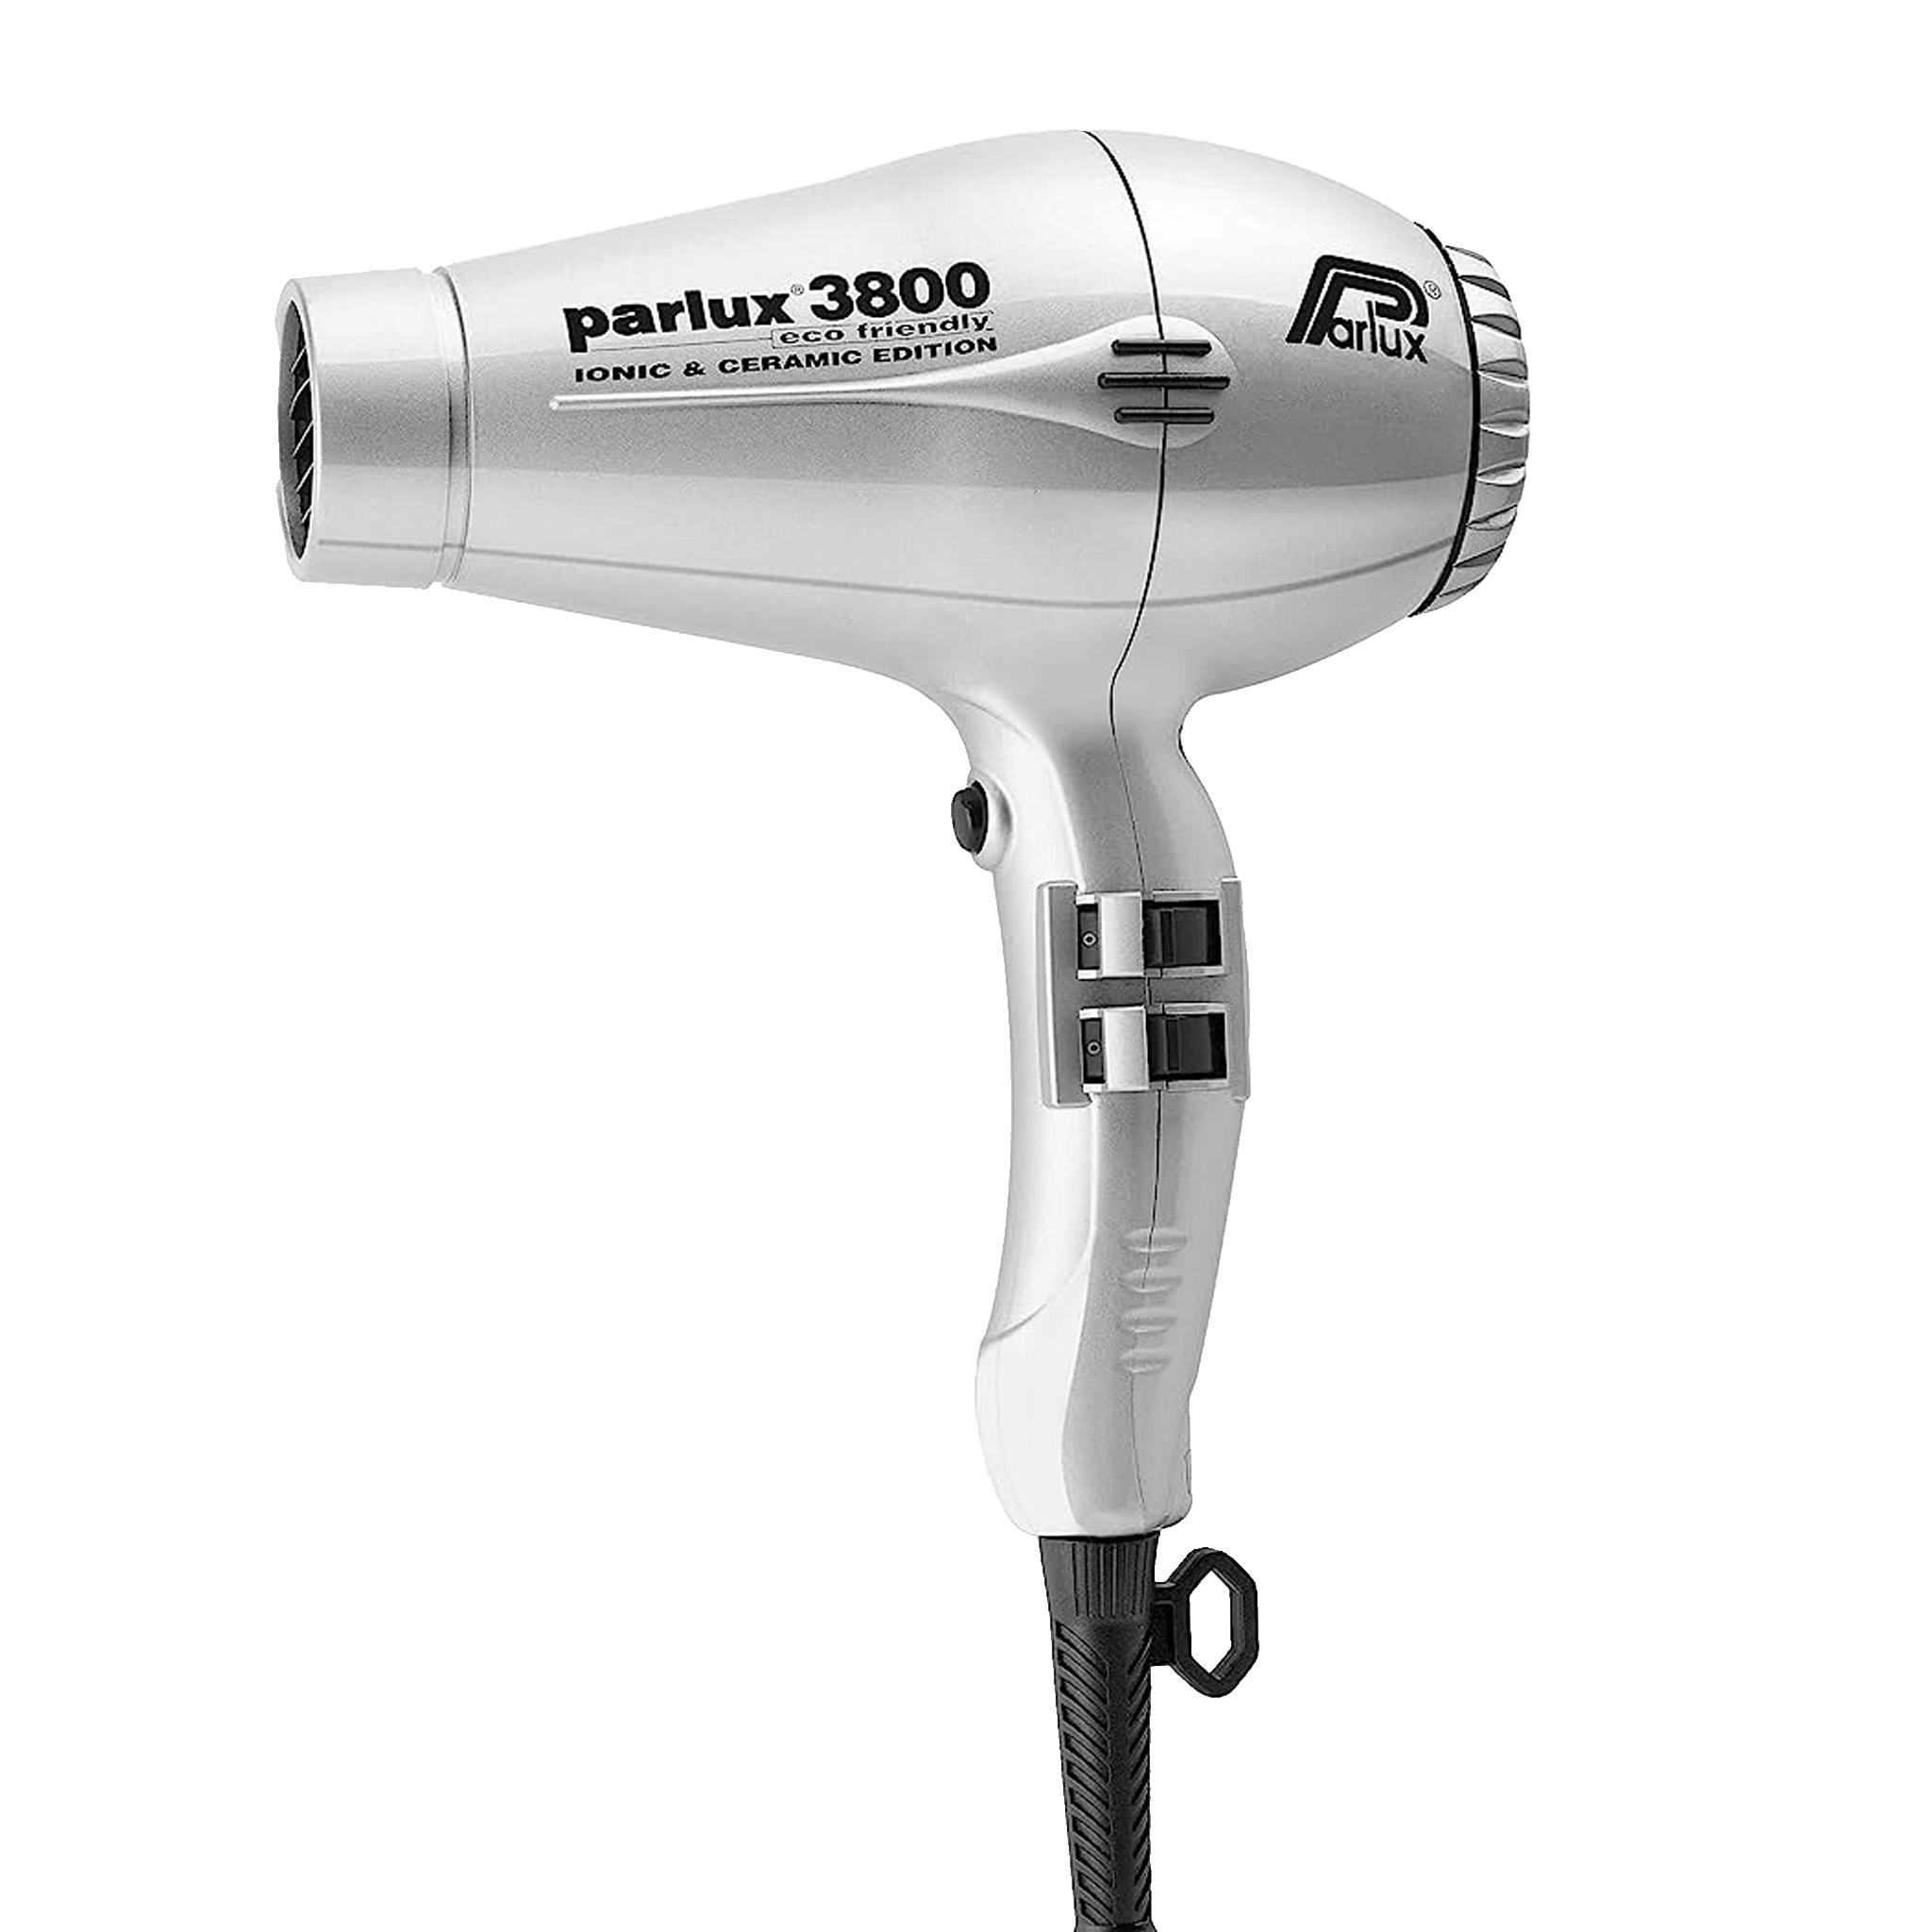 Parlux 3800 Ionic and Ceramic Hair Dryer - Silver